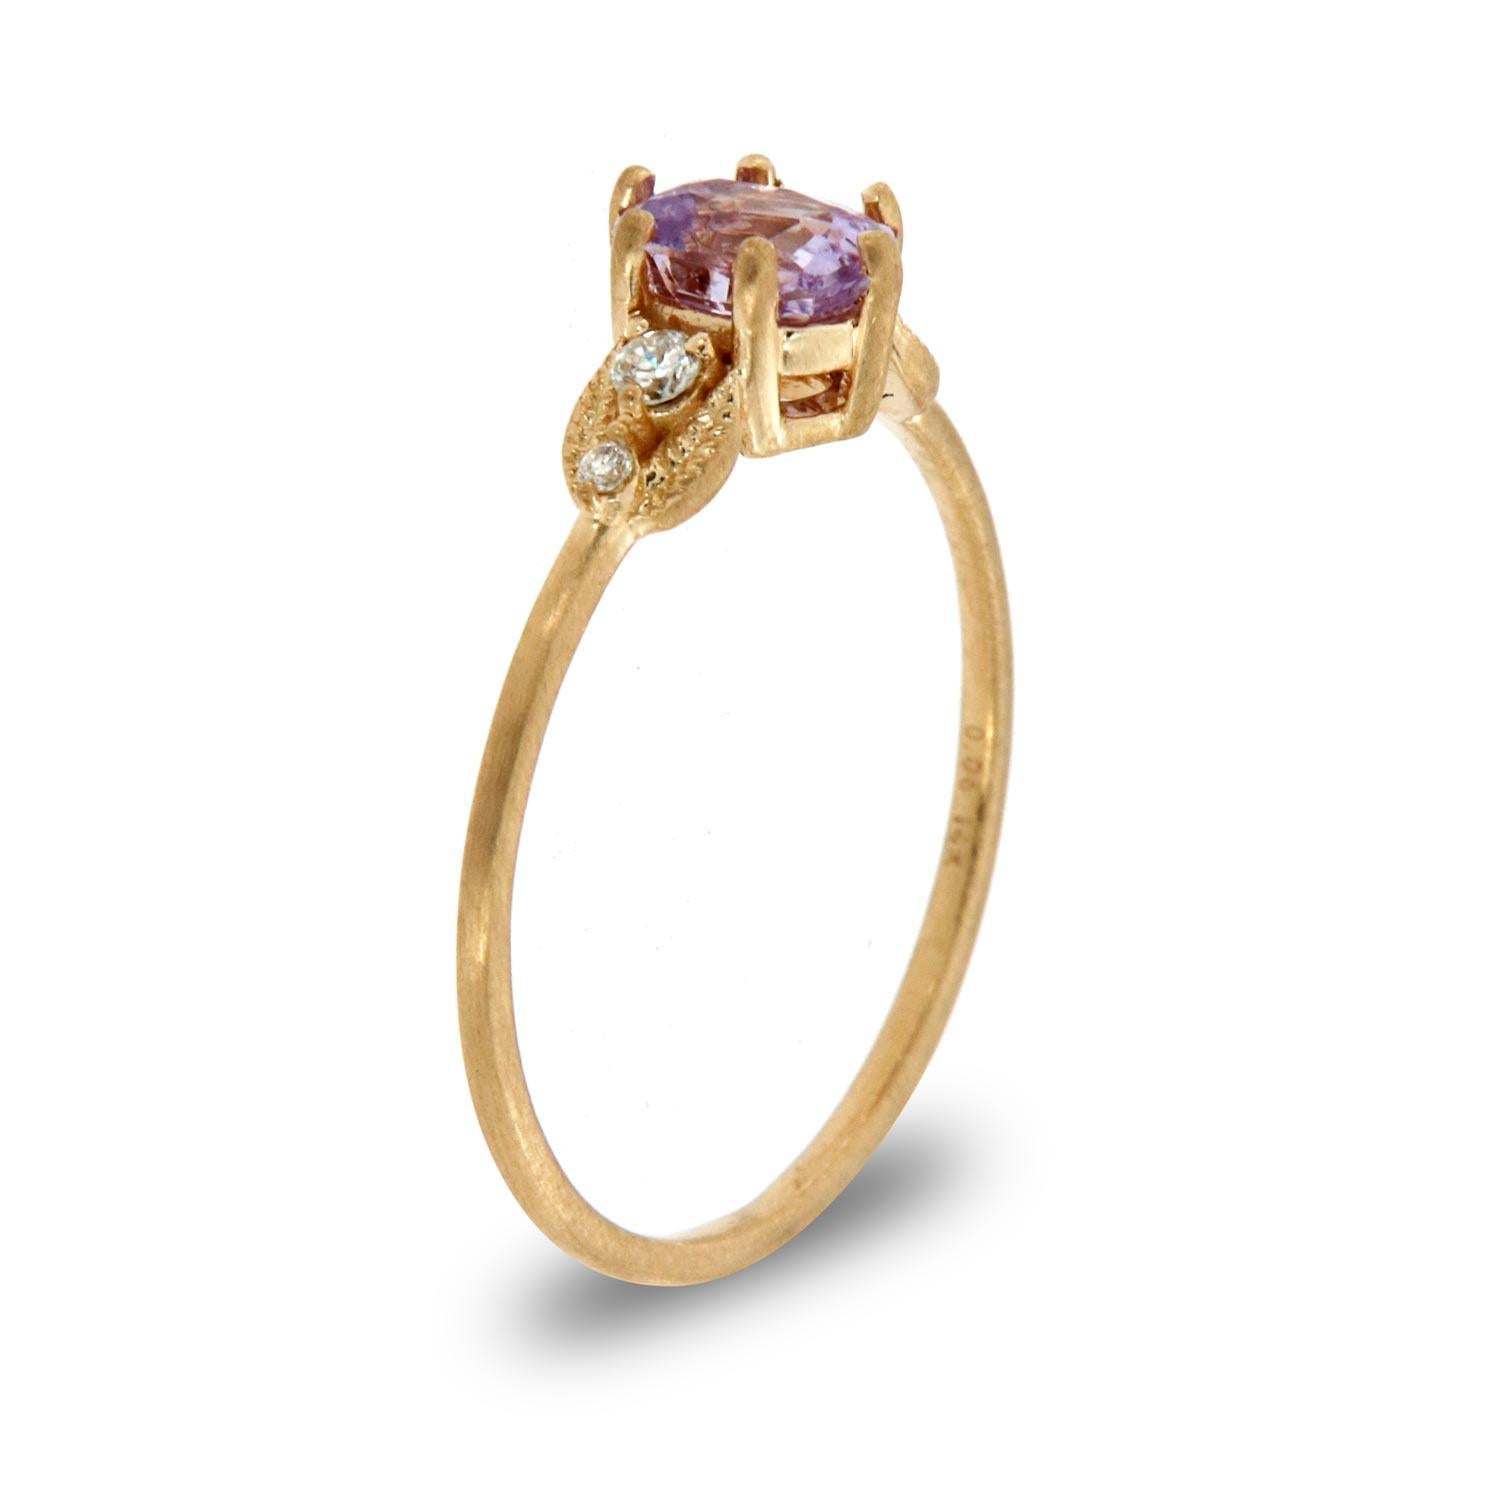 This petite organic style rustic ring is impressive in its vintage appeal, featuring a natural lavender oval sapphire, accented with round brilliant diamonds encircled by a delicate milgrain design. Experience the difference in person!

Product